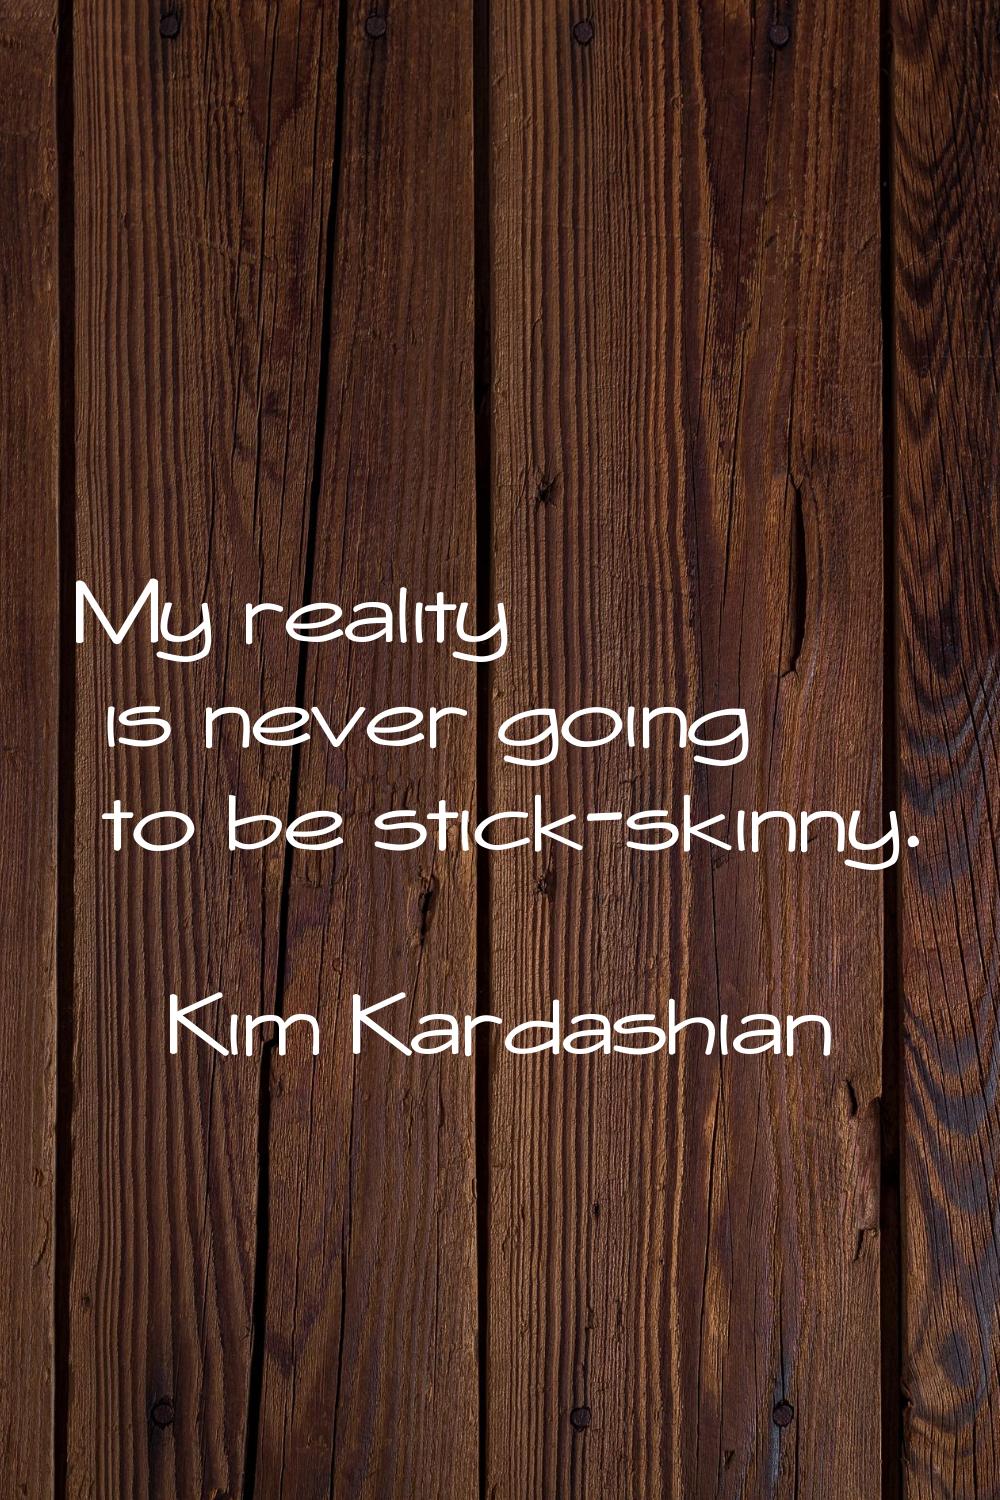 My reality is never going to be stick-skinny.